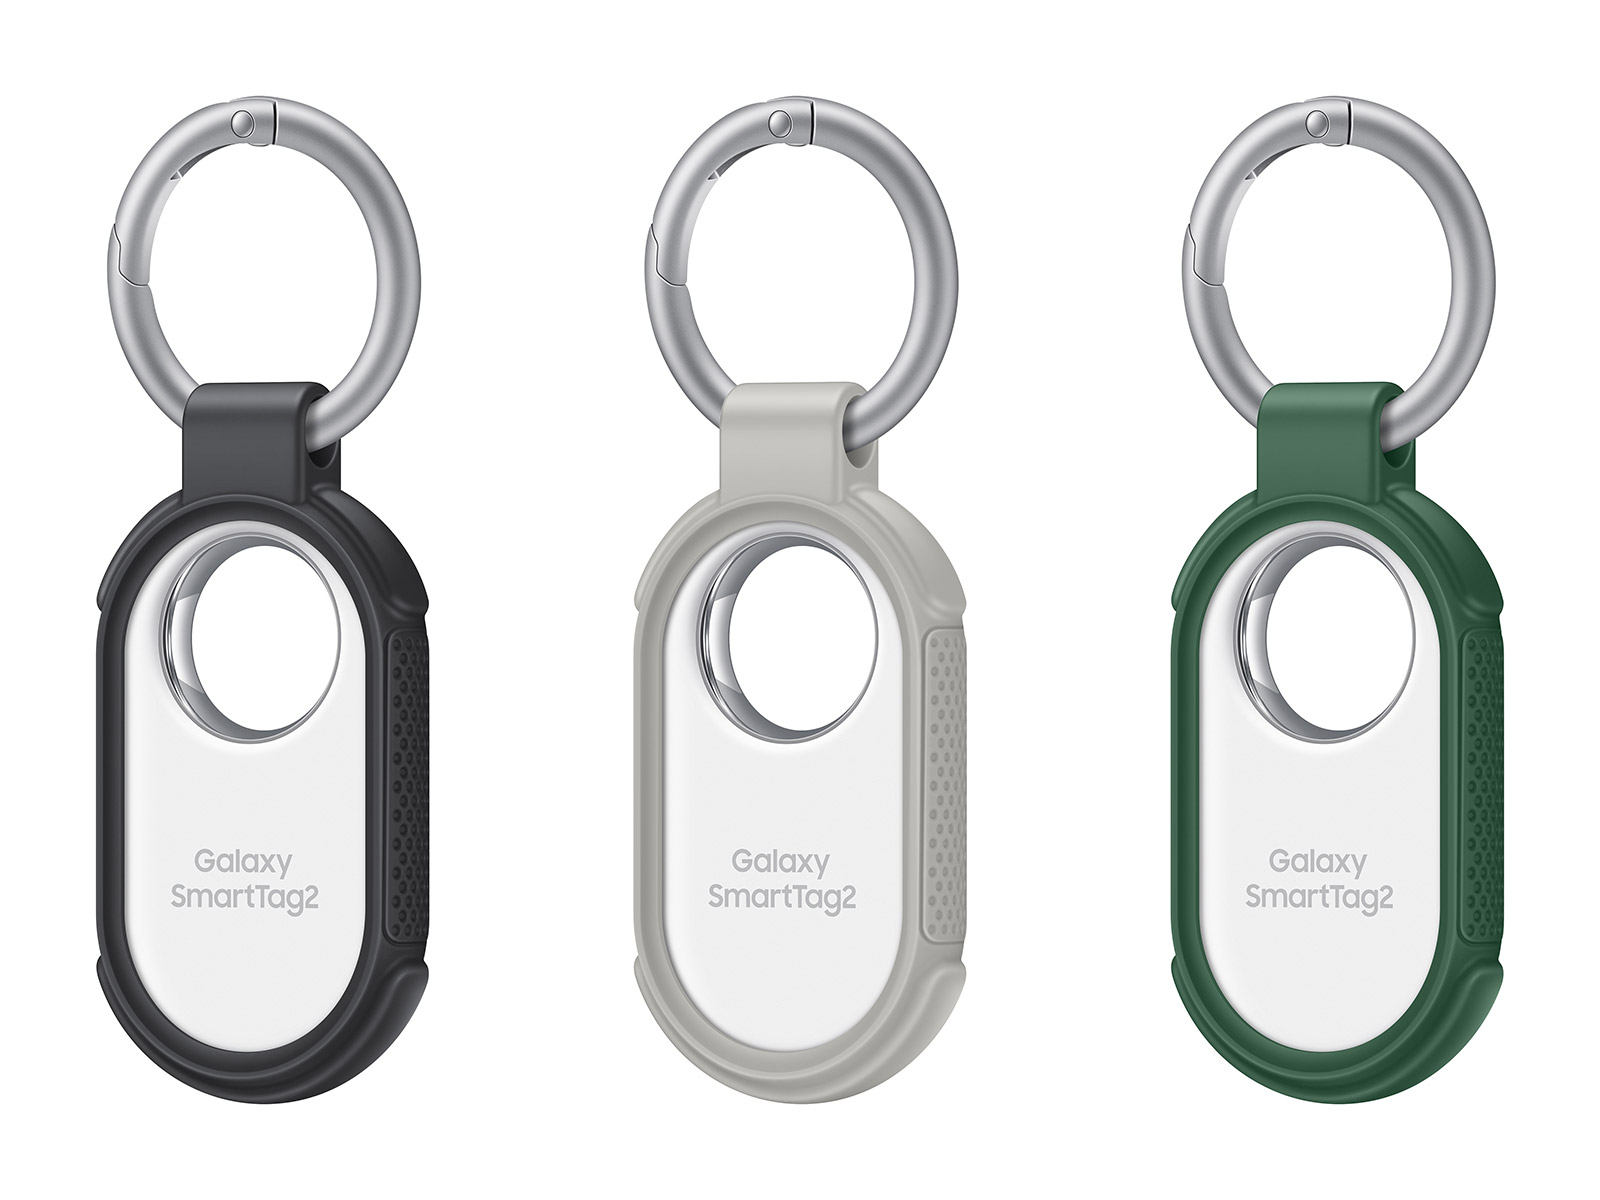 Samsung Smart Tag 2 gives Apple's Air Tag a run for its money